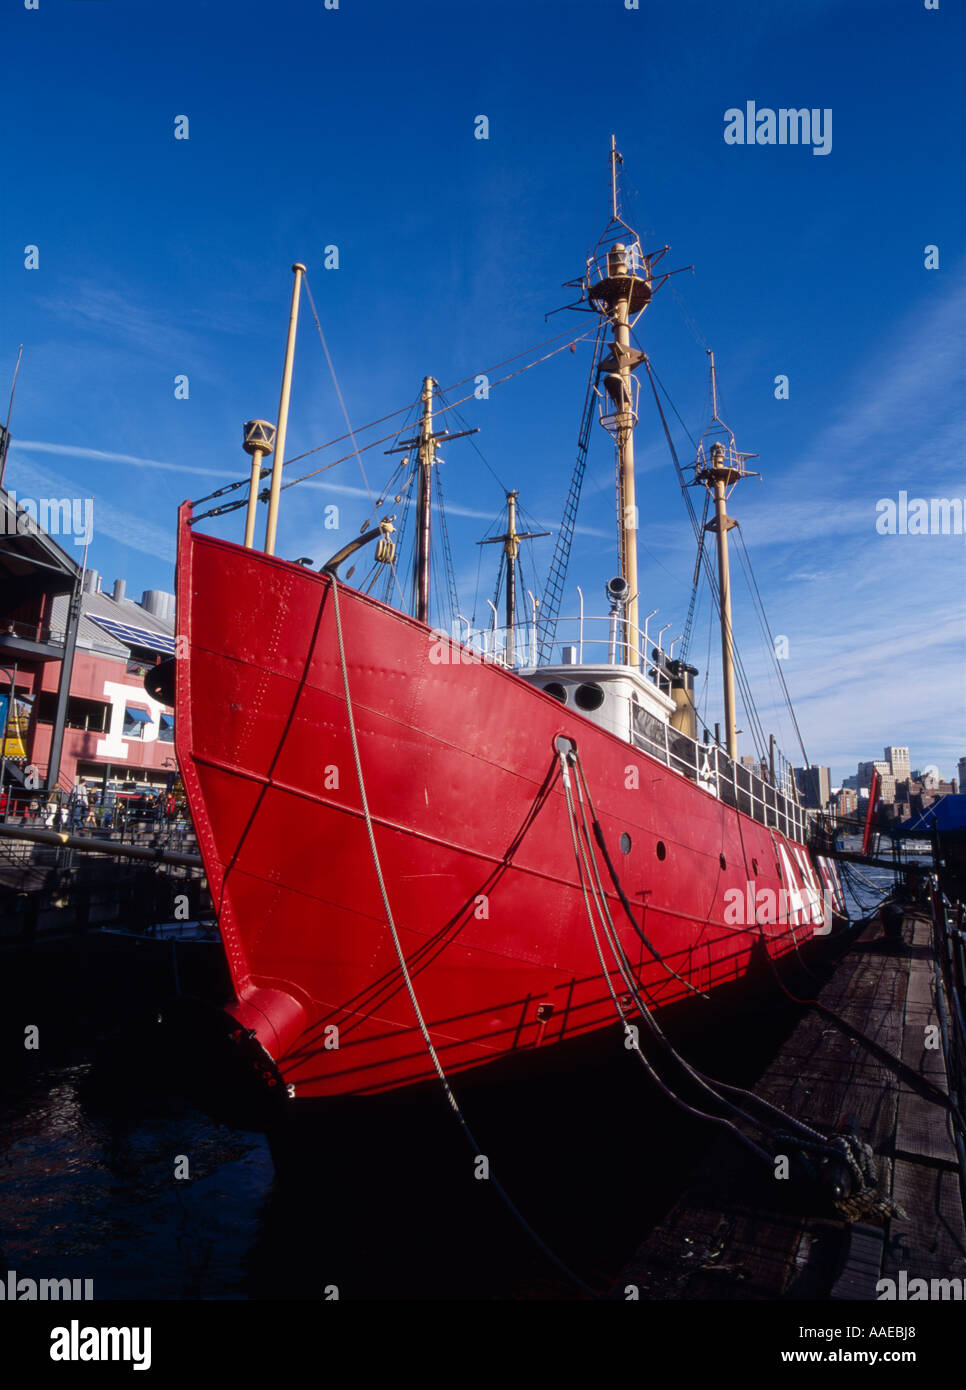 Ambrogio lightship, South Street porta a mare museo, East River, New York Foto Stock